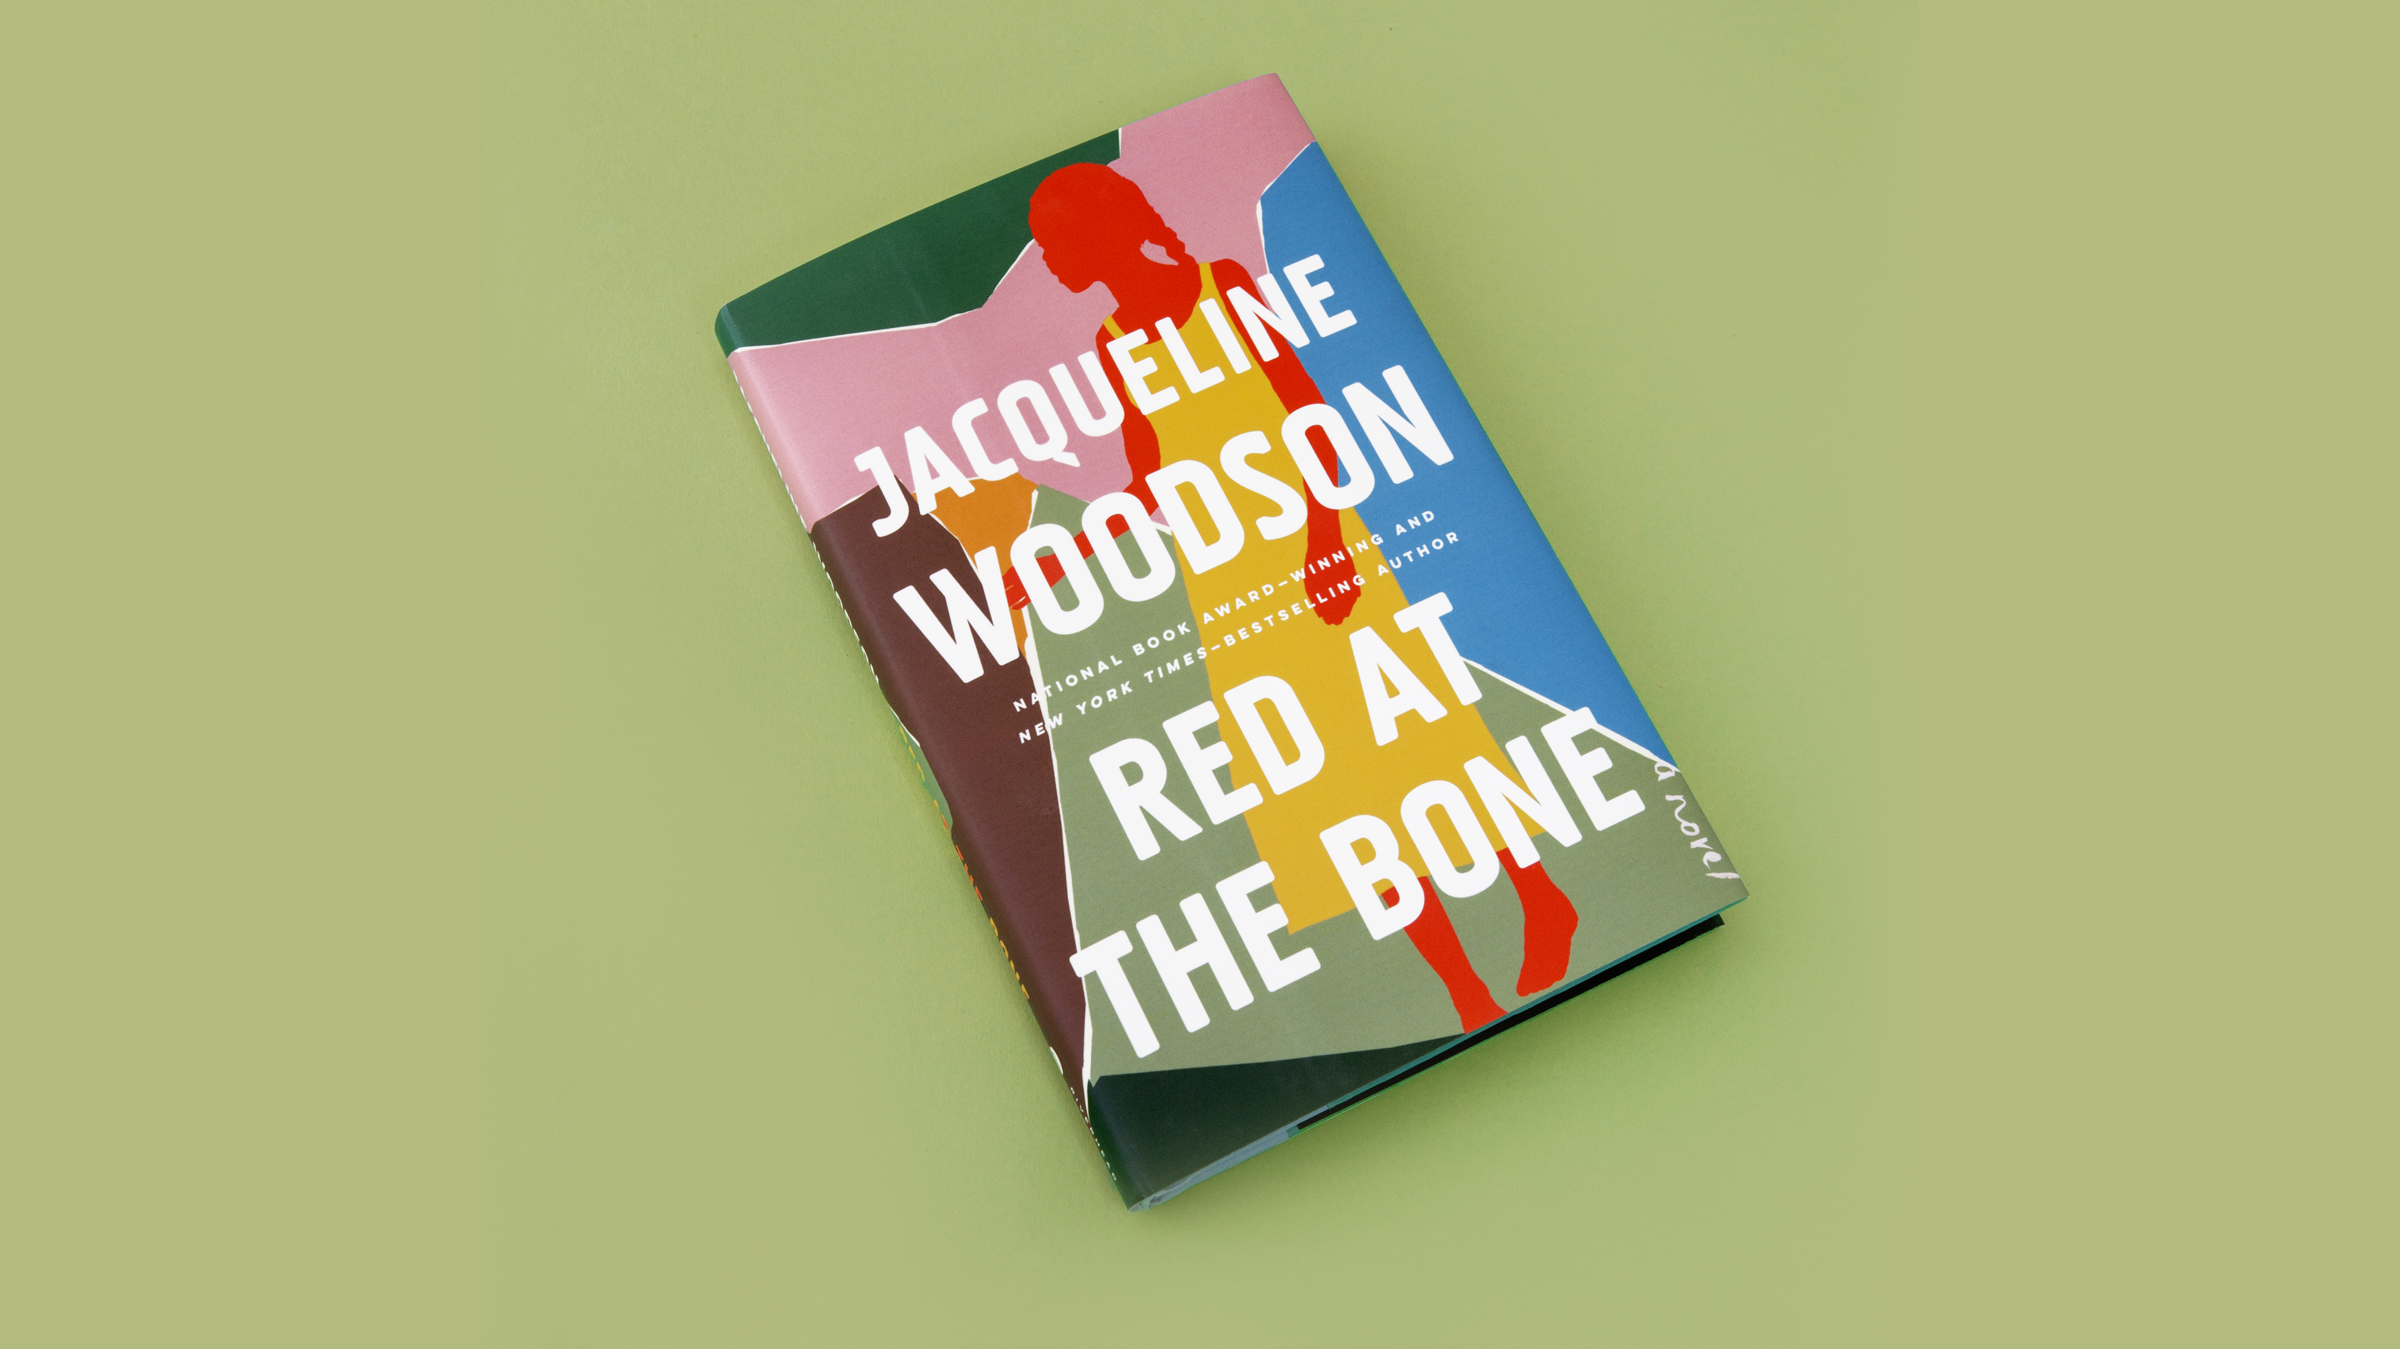 Jacqueline-Woodson-Red-at-the-Bone